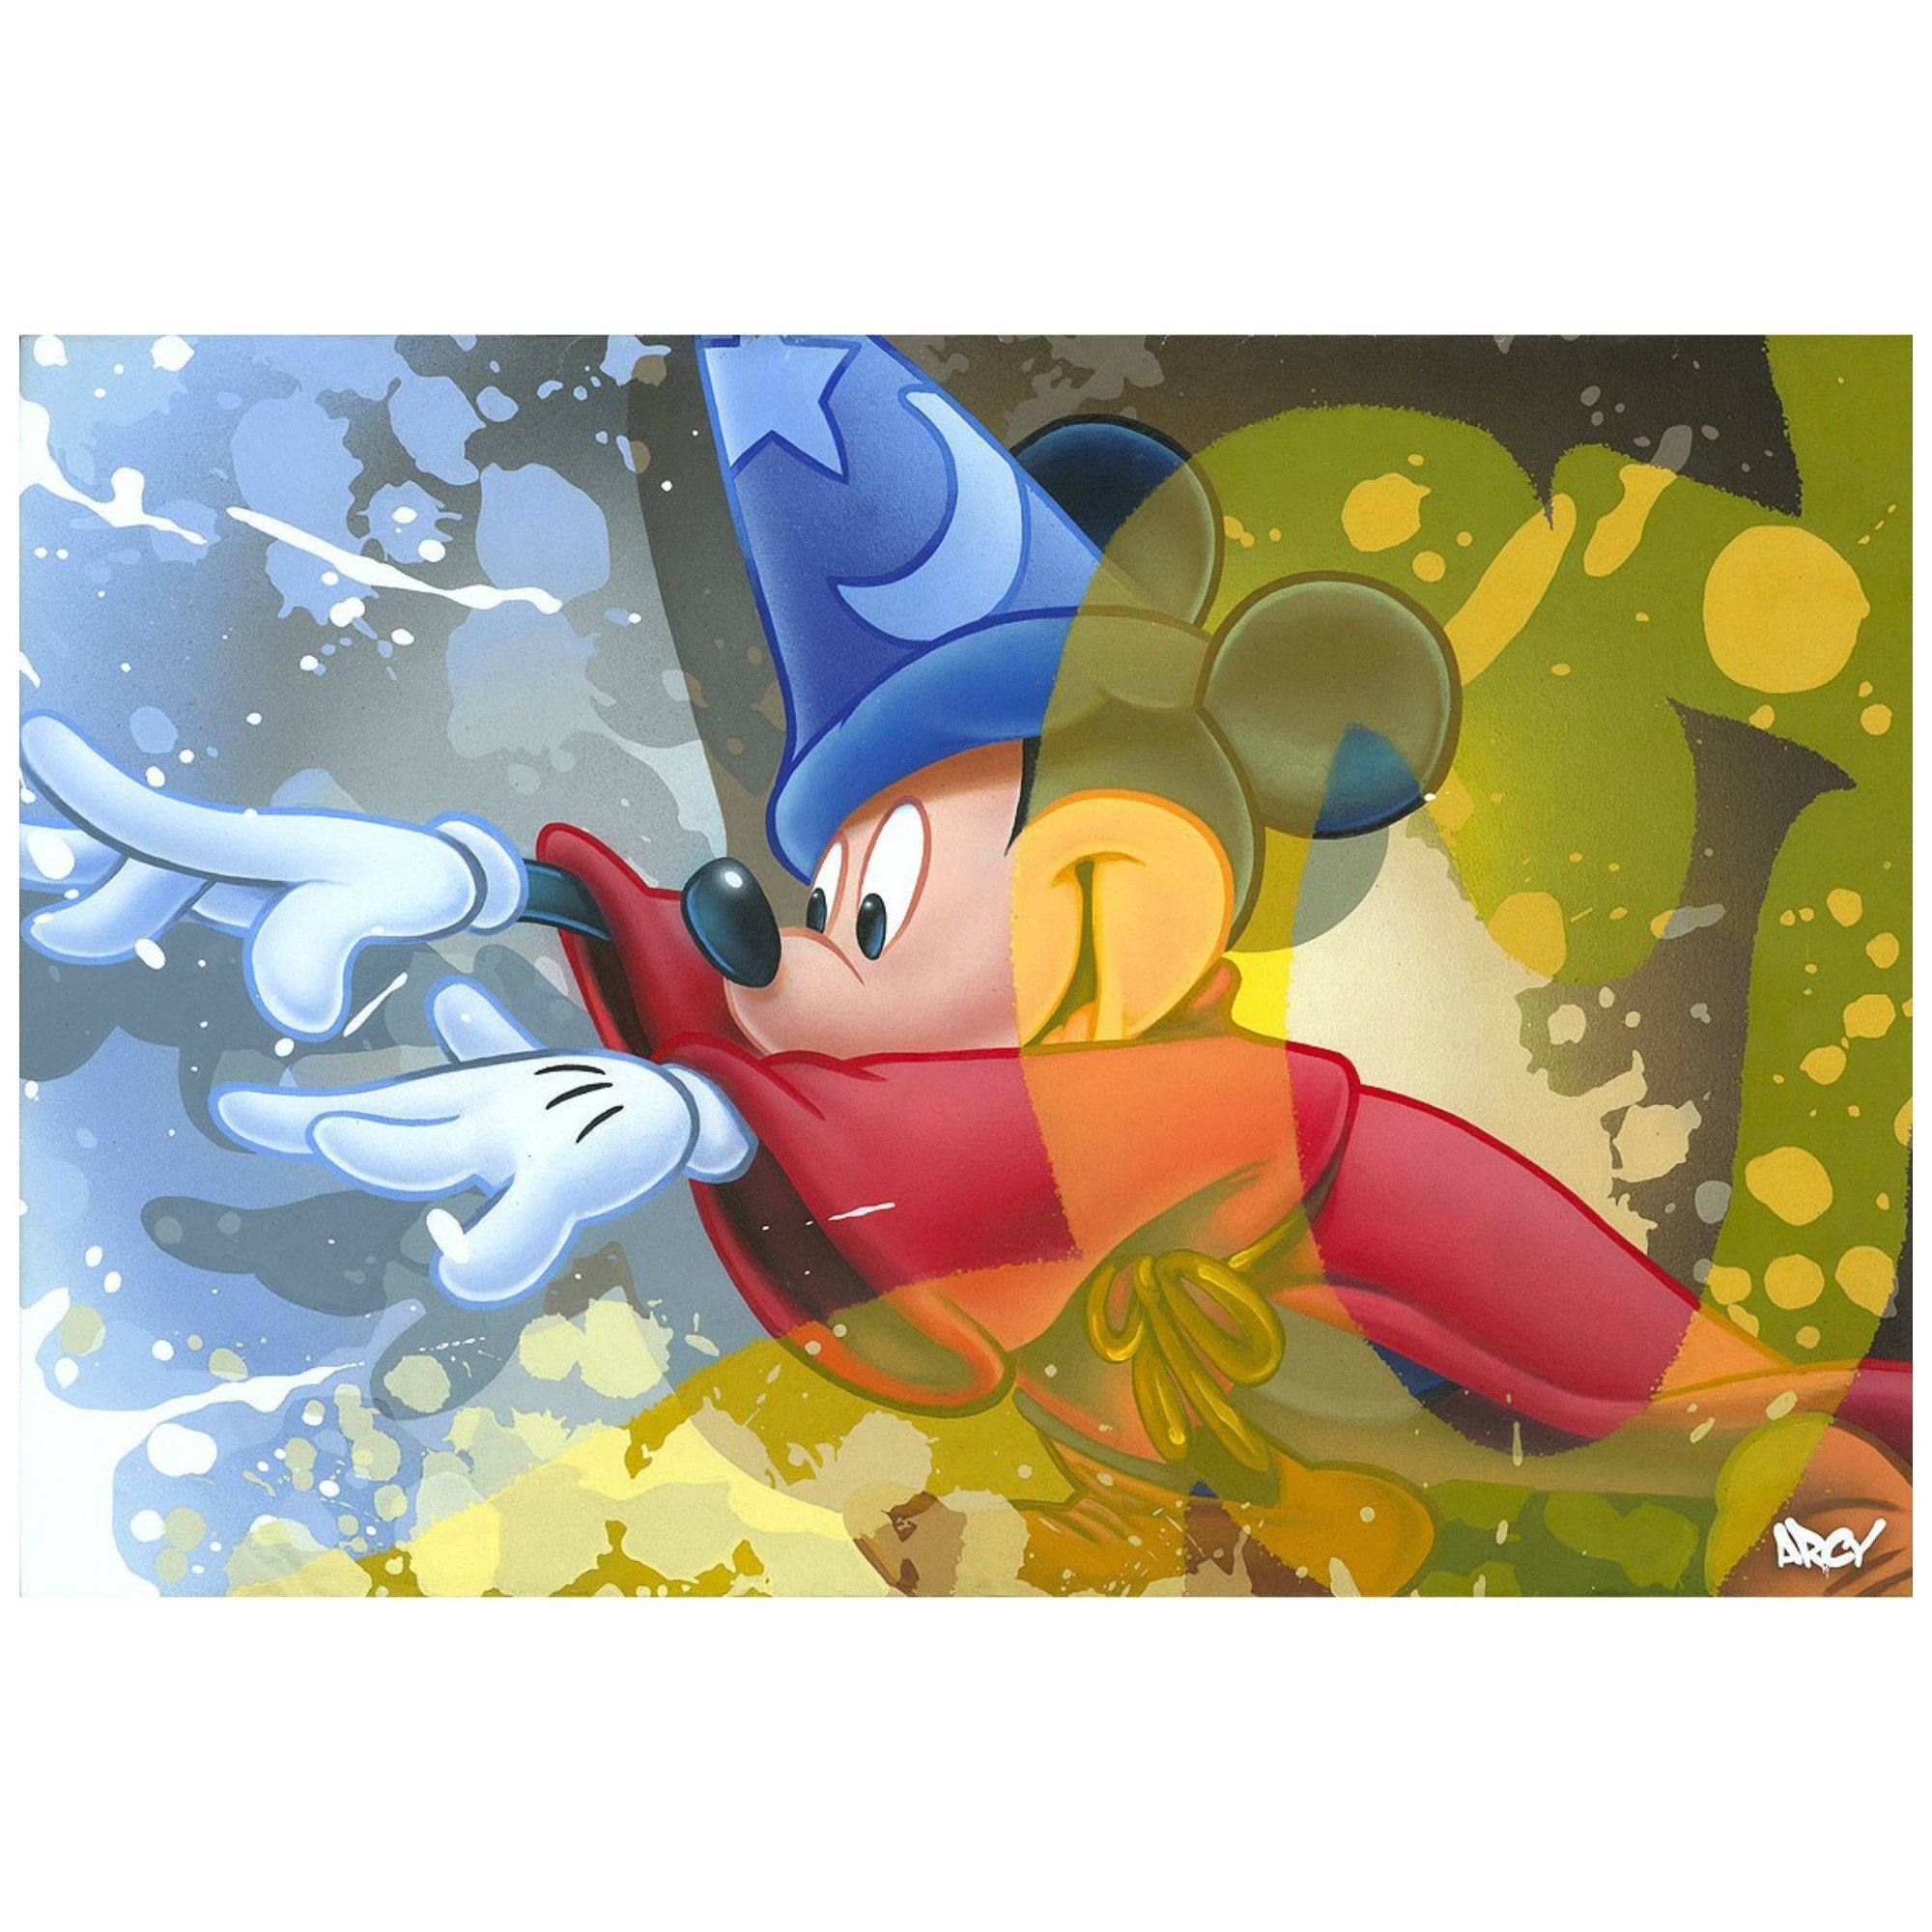 Sorcerer Mickey casts a magical spell - painted with a splash of colored background.